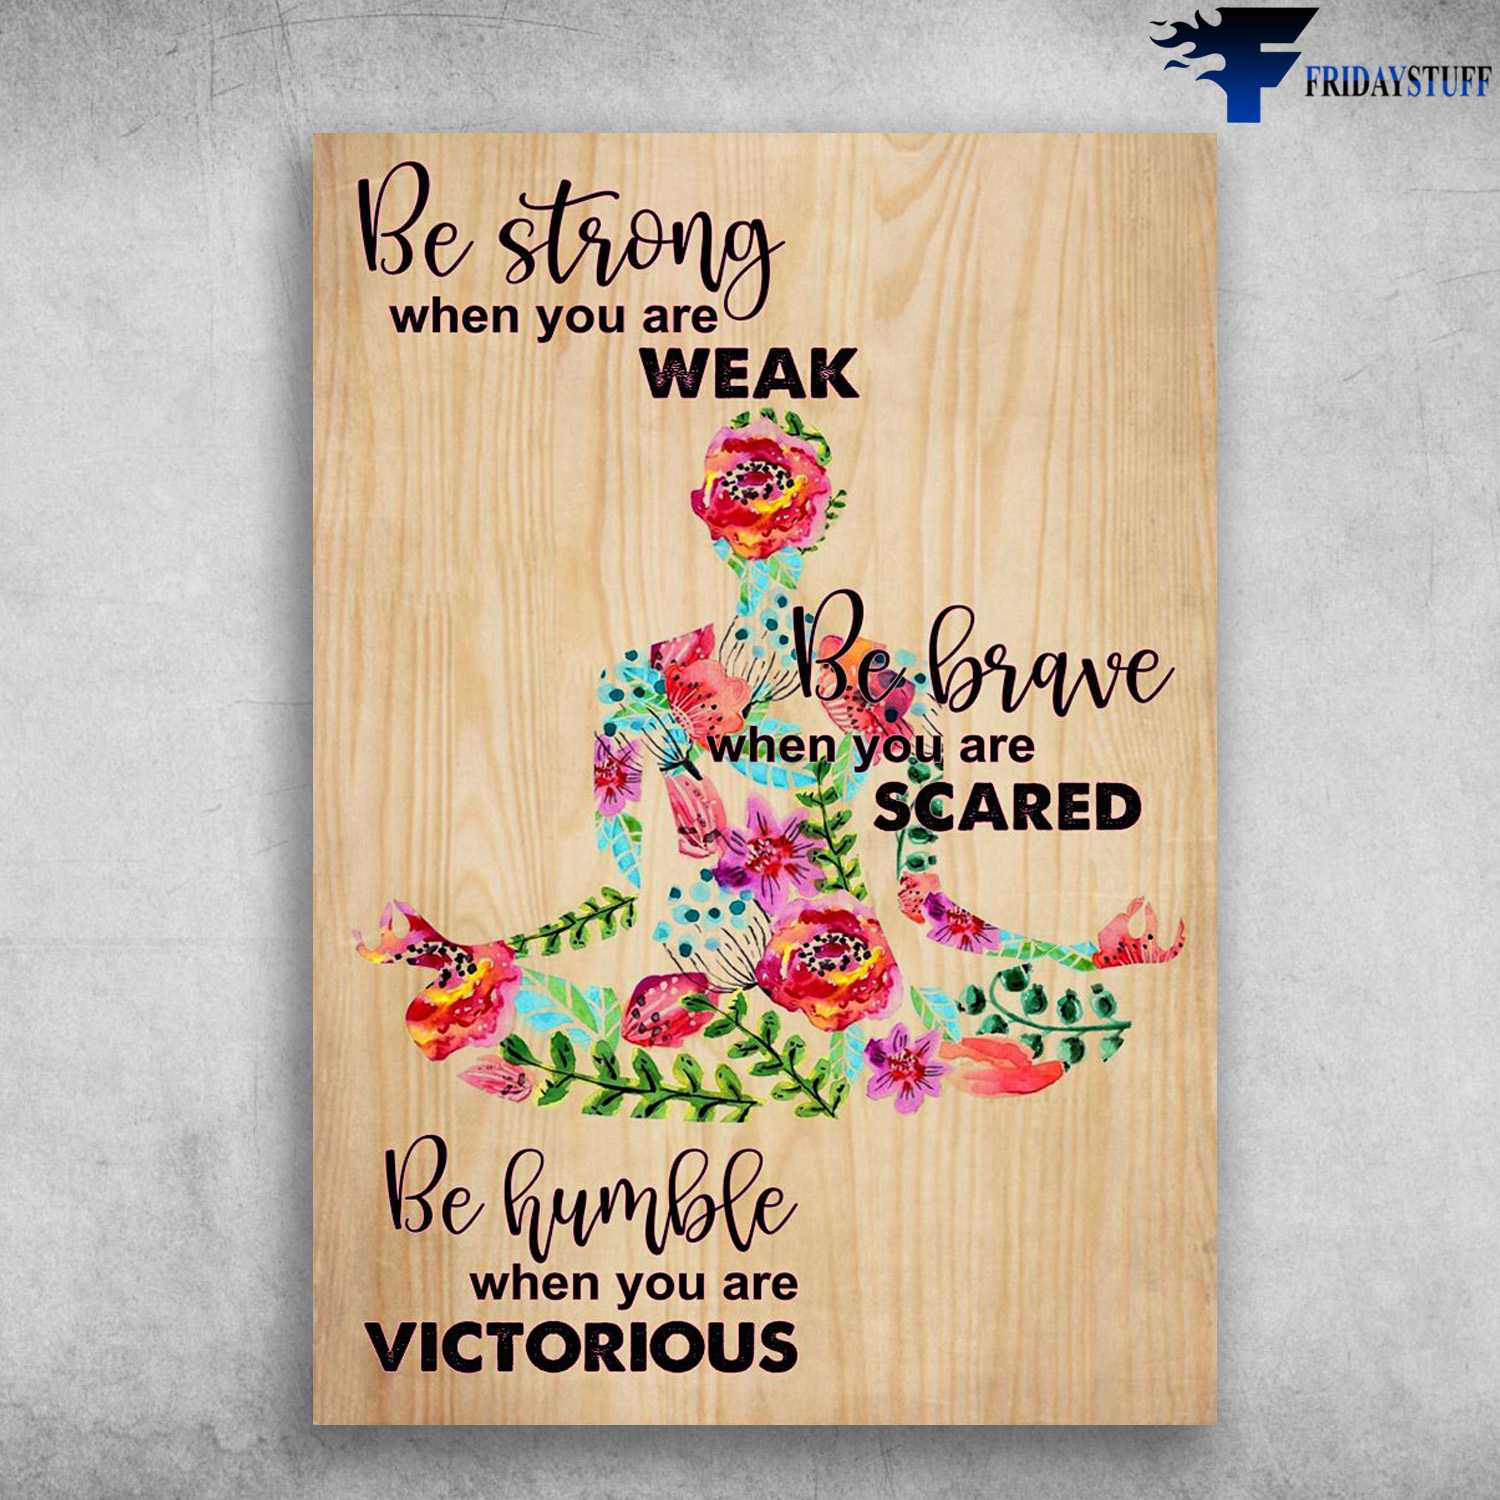 Yoga Poster, Yoga Decor, Be Strong When You Are Weak, Be Brave When You Are Scared, Be Humble When You Are Victorious